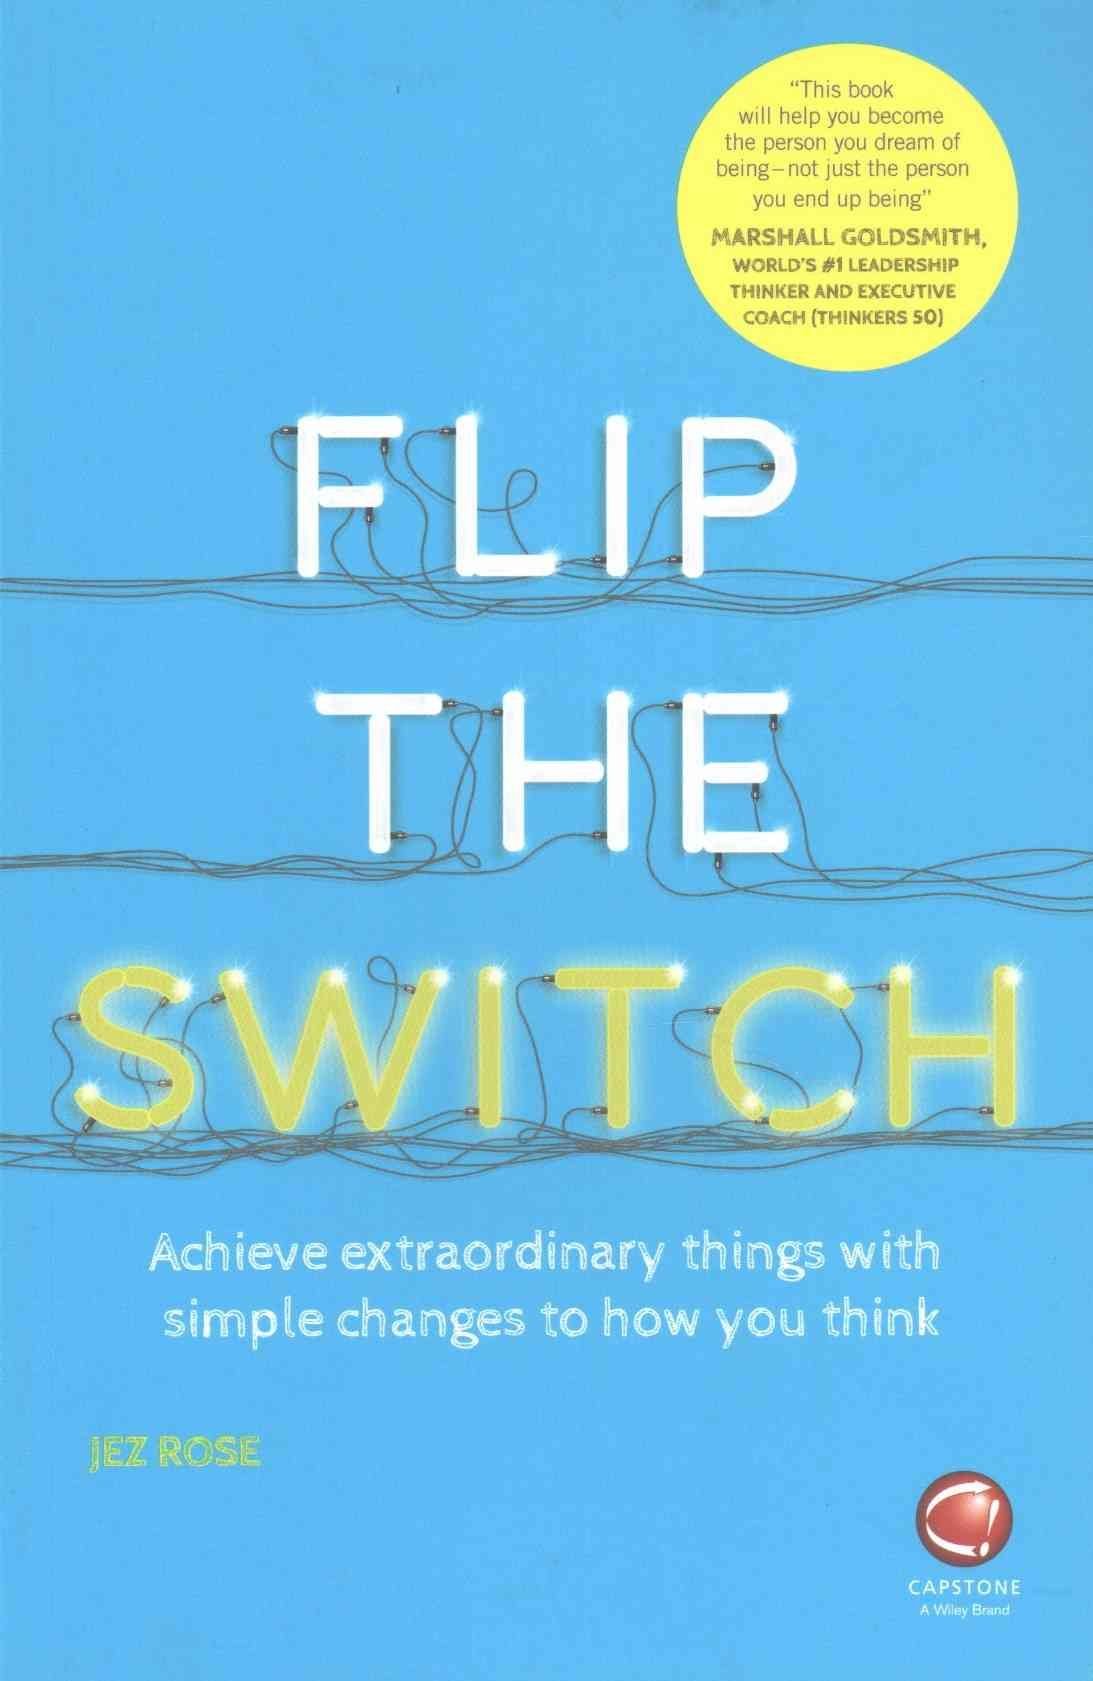 Flip the Switch - Achieve Extraordinary Things with Simple Changes to How You Think